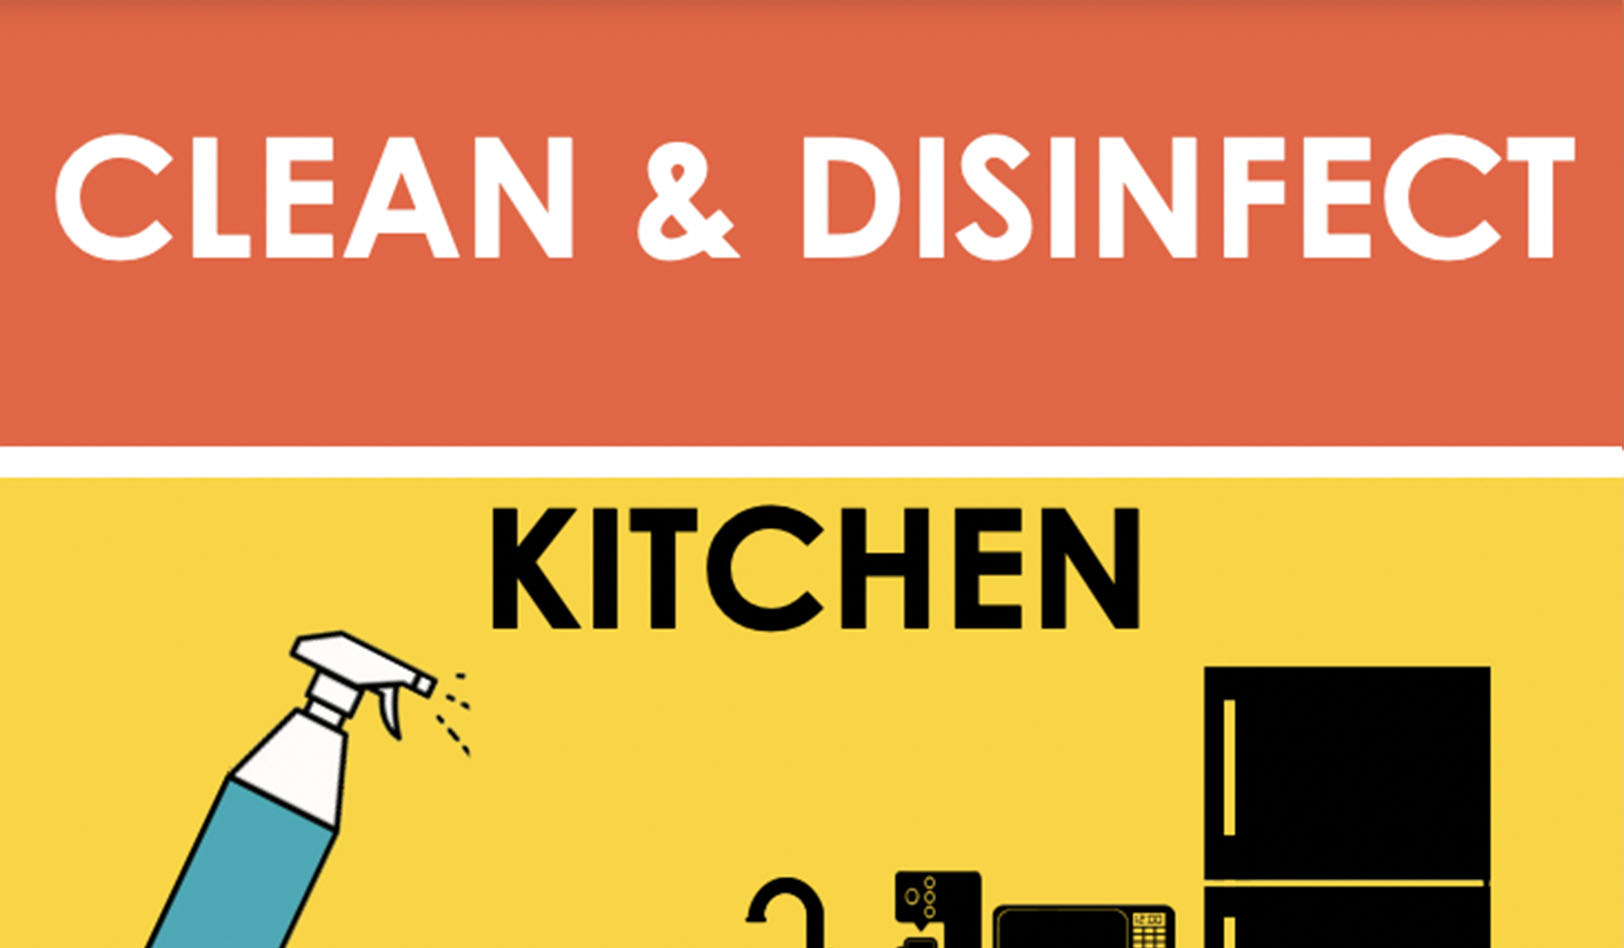 Clean & Disinfect: KITCHENS